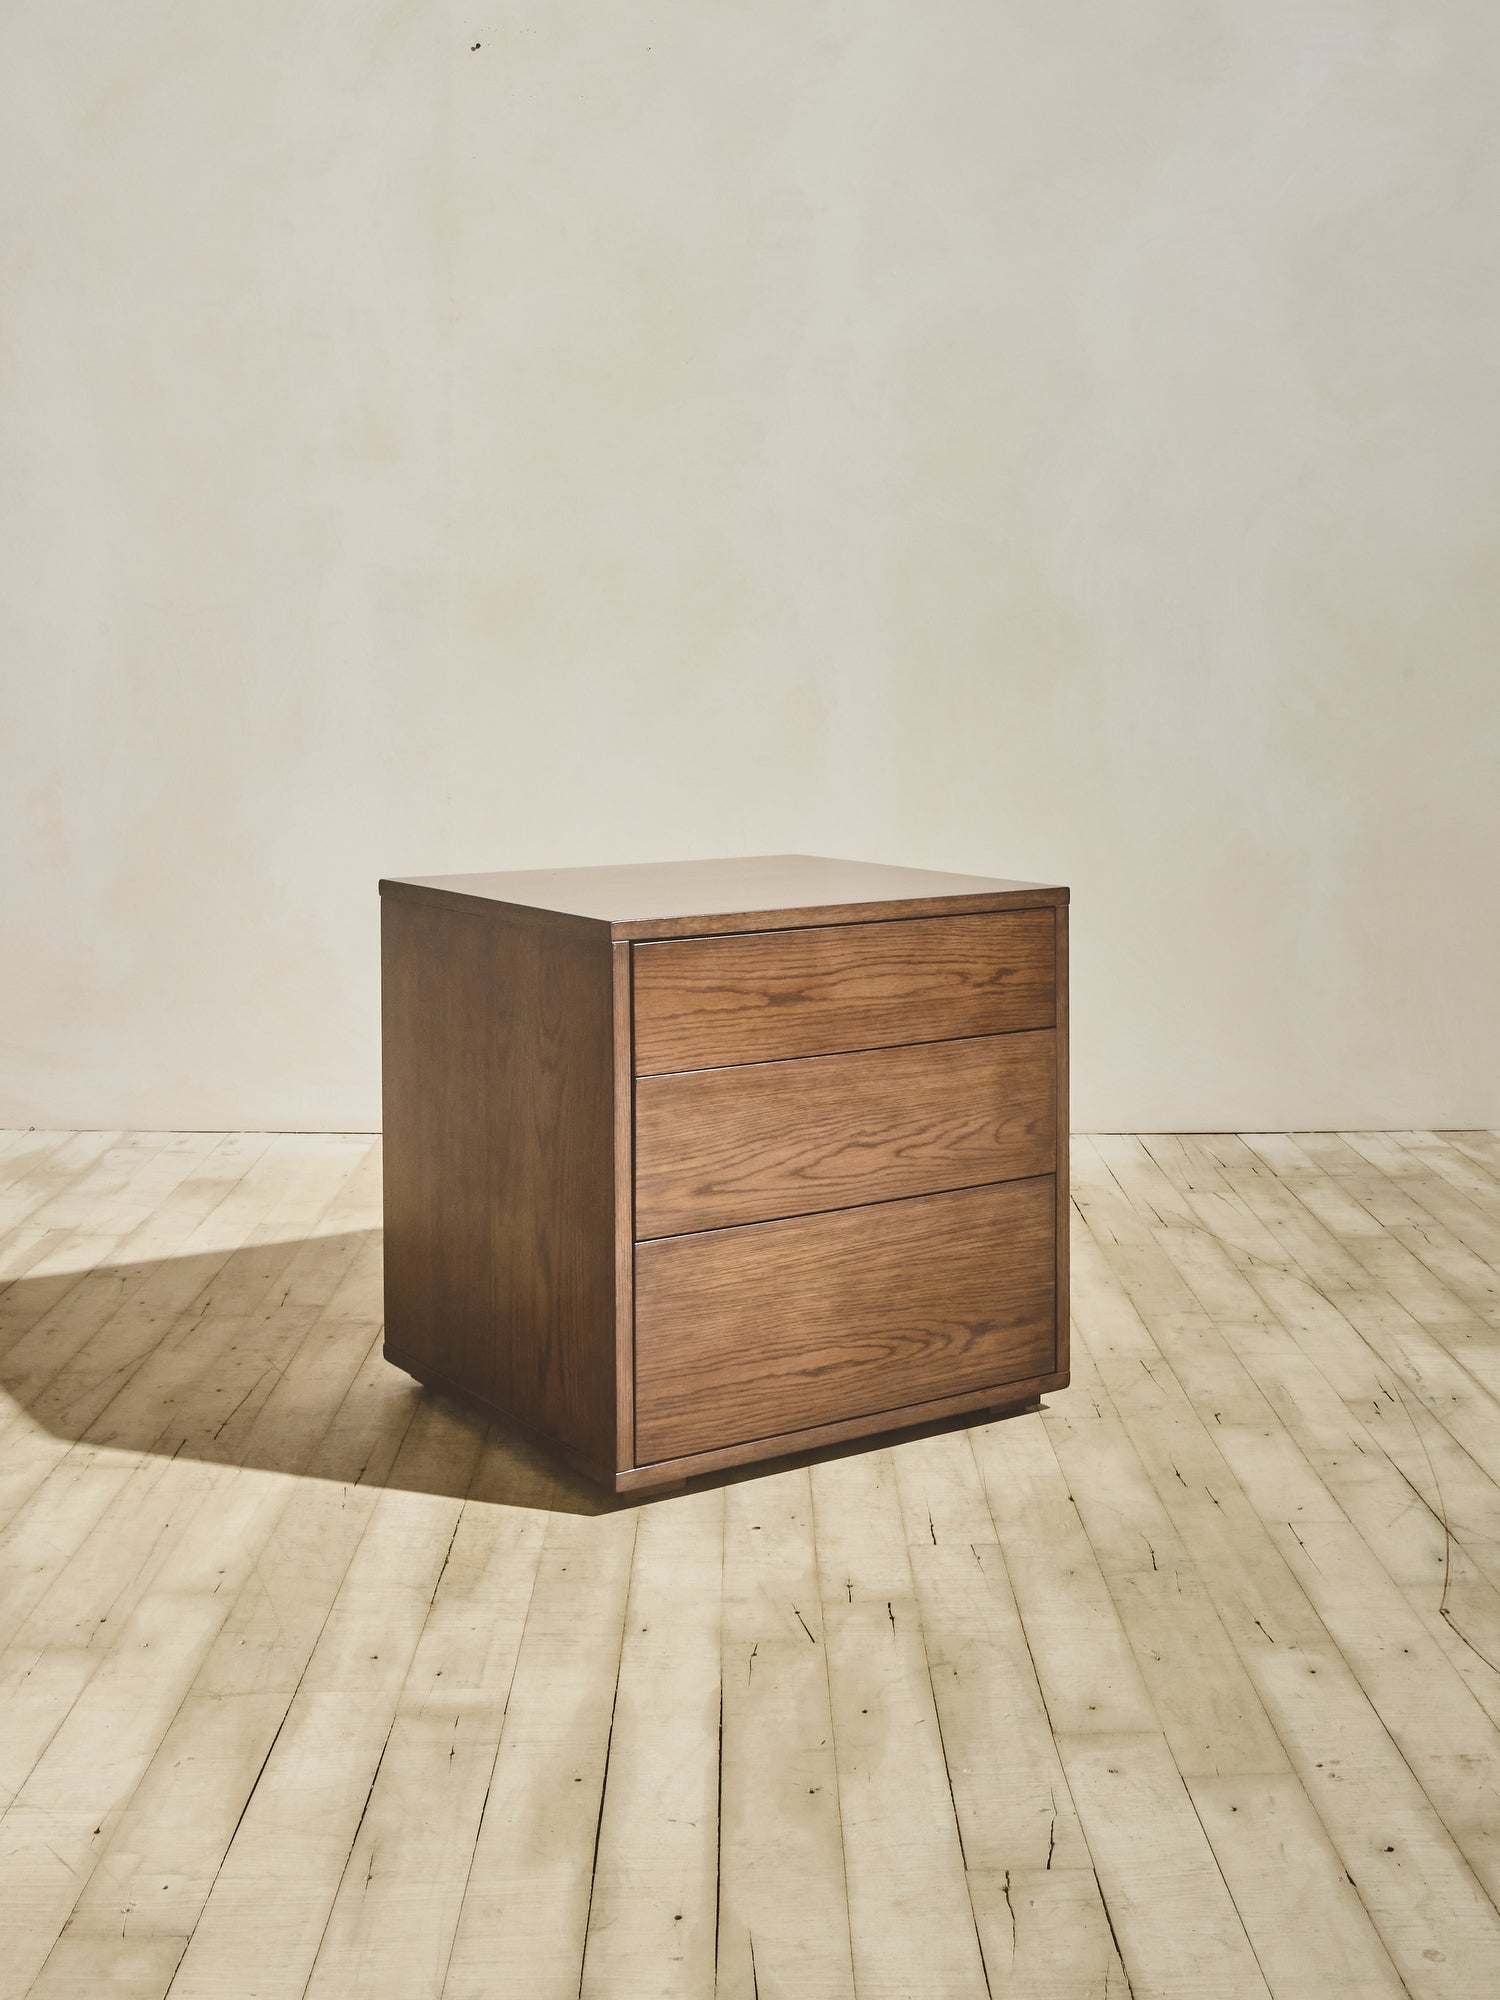 Minimalist Ghent Side Table in natural finish.